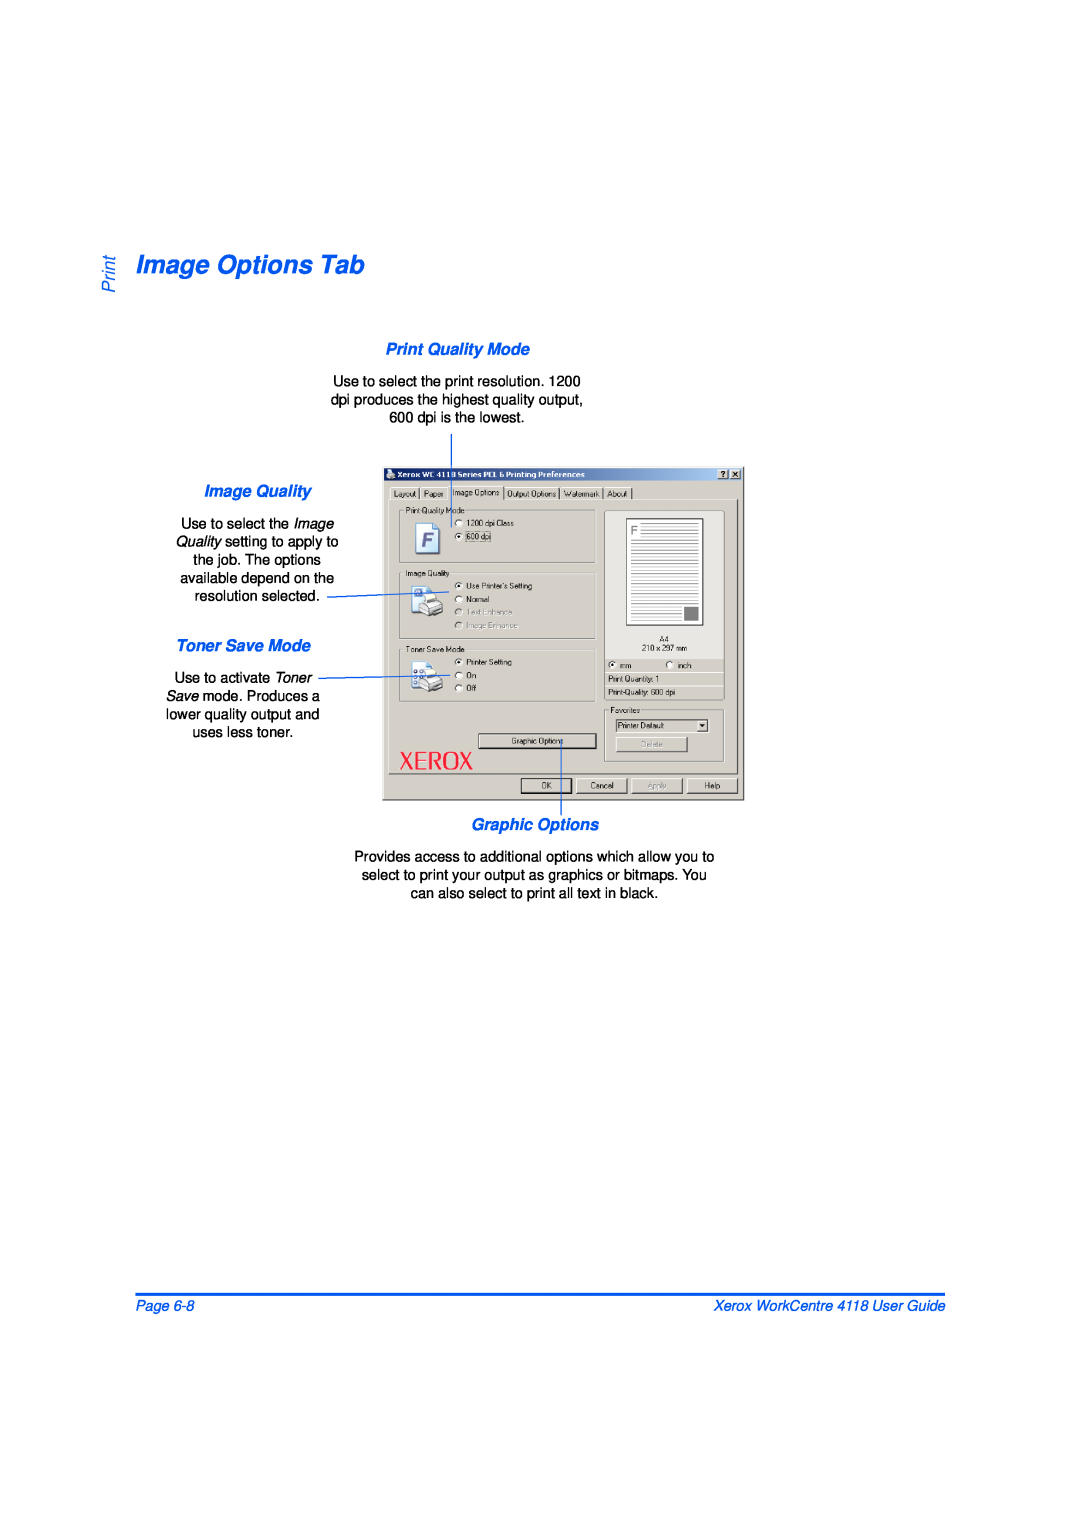 Xerox 32N00467 manual Image Options Tab, Print Quality Mode, Image Quality, Toner Save Mode, Graphic Options, Page 